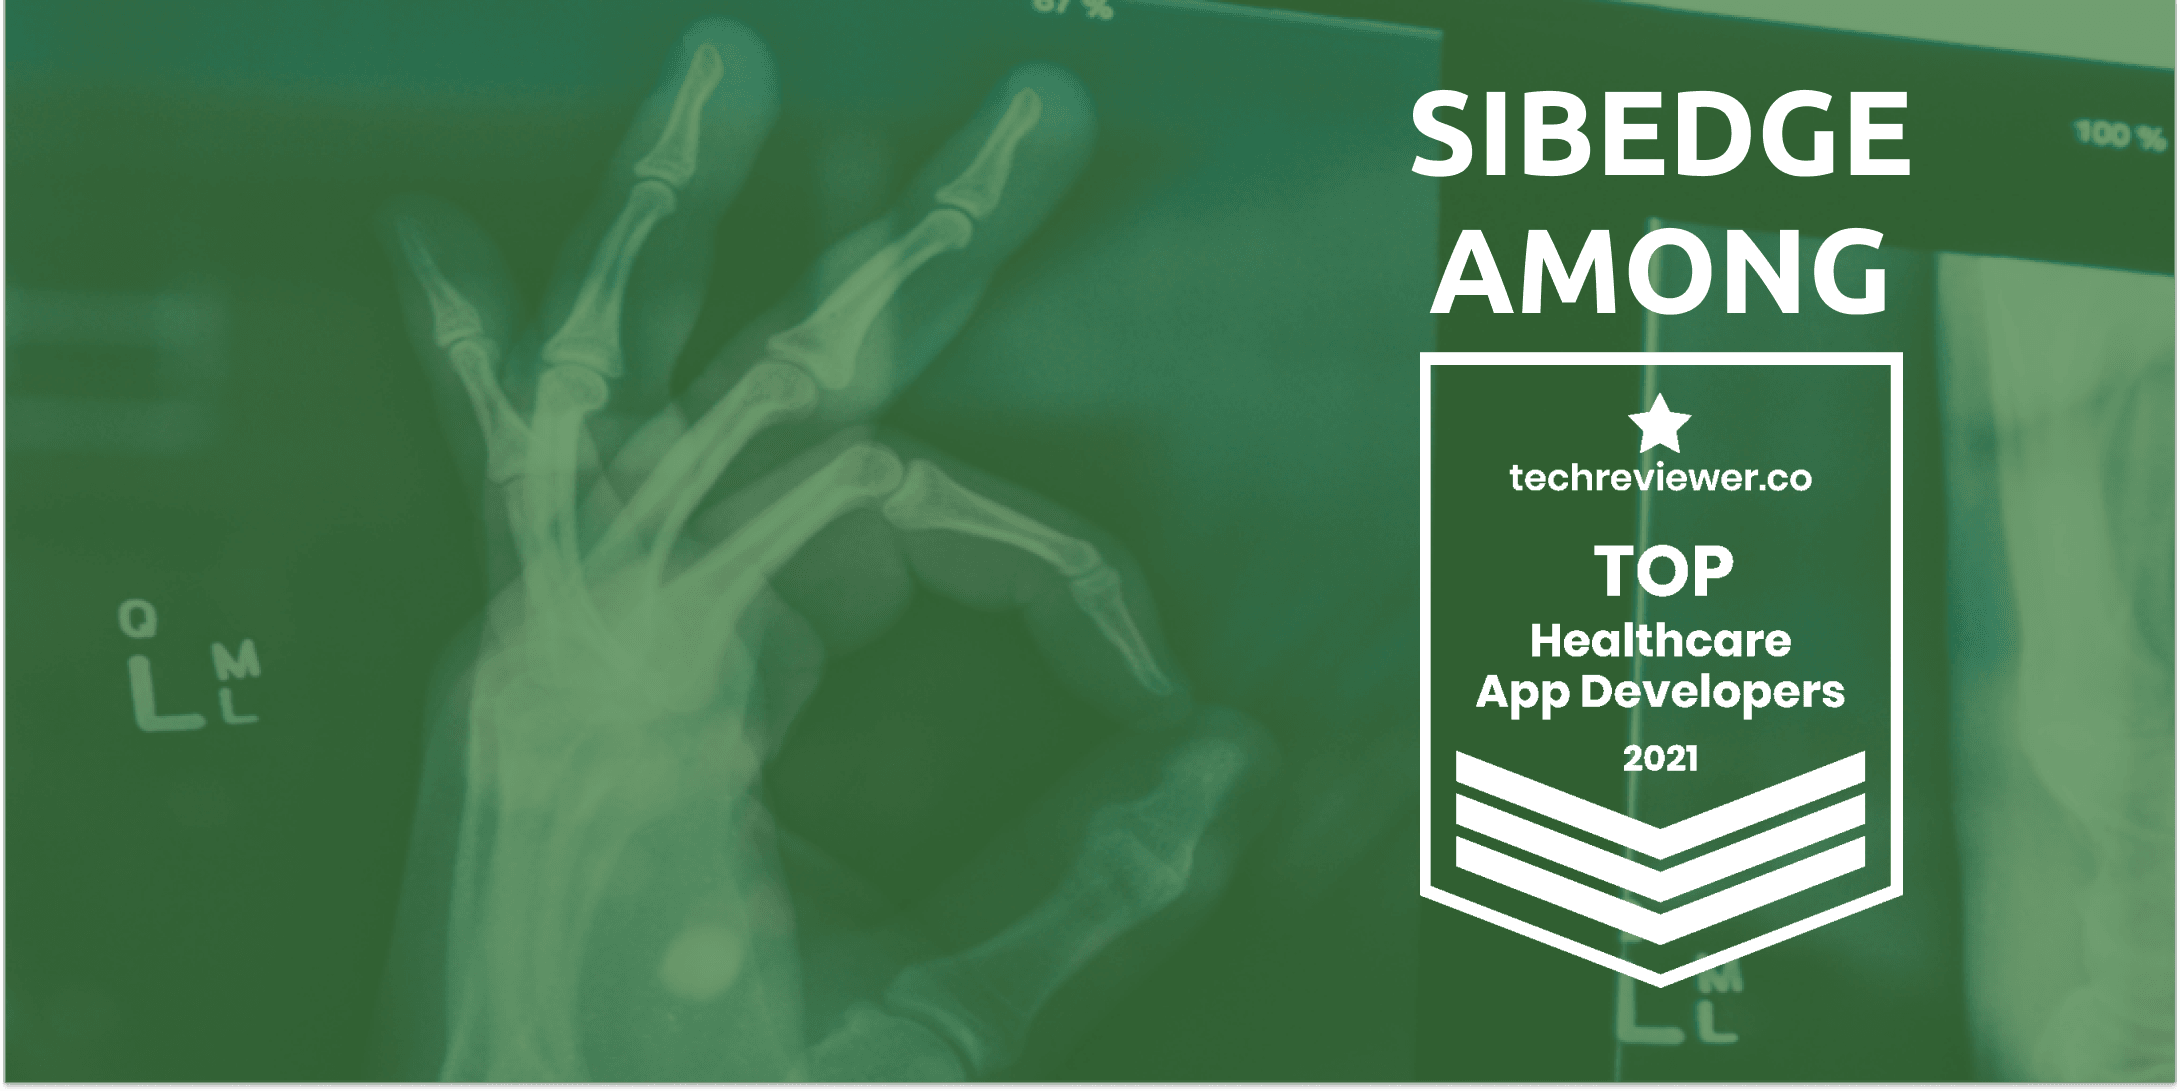 Sibedge Named Among Top Healthcare App Developers